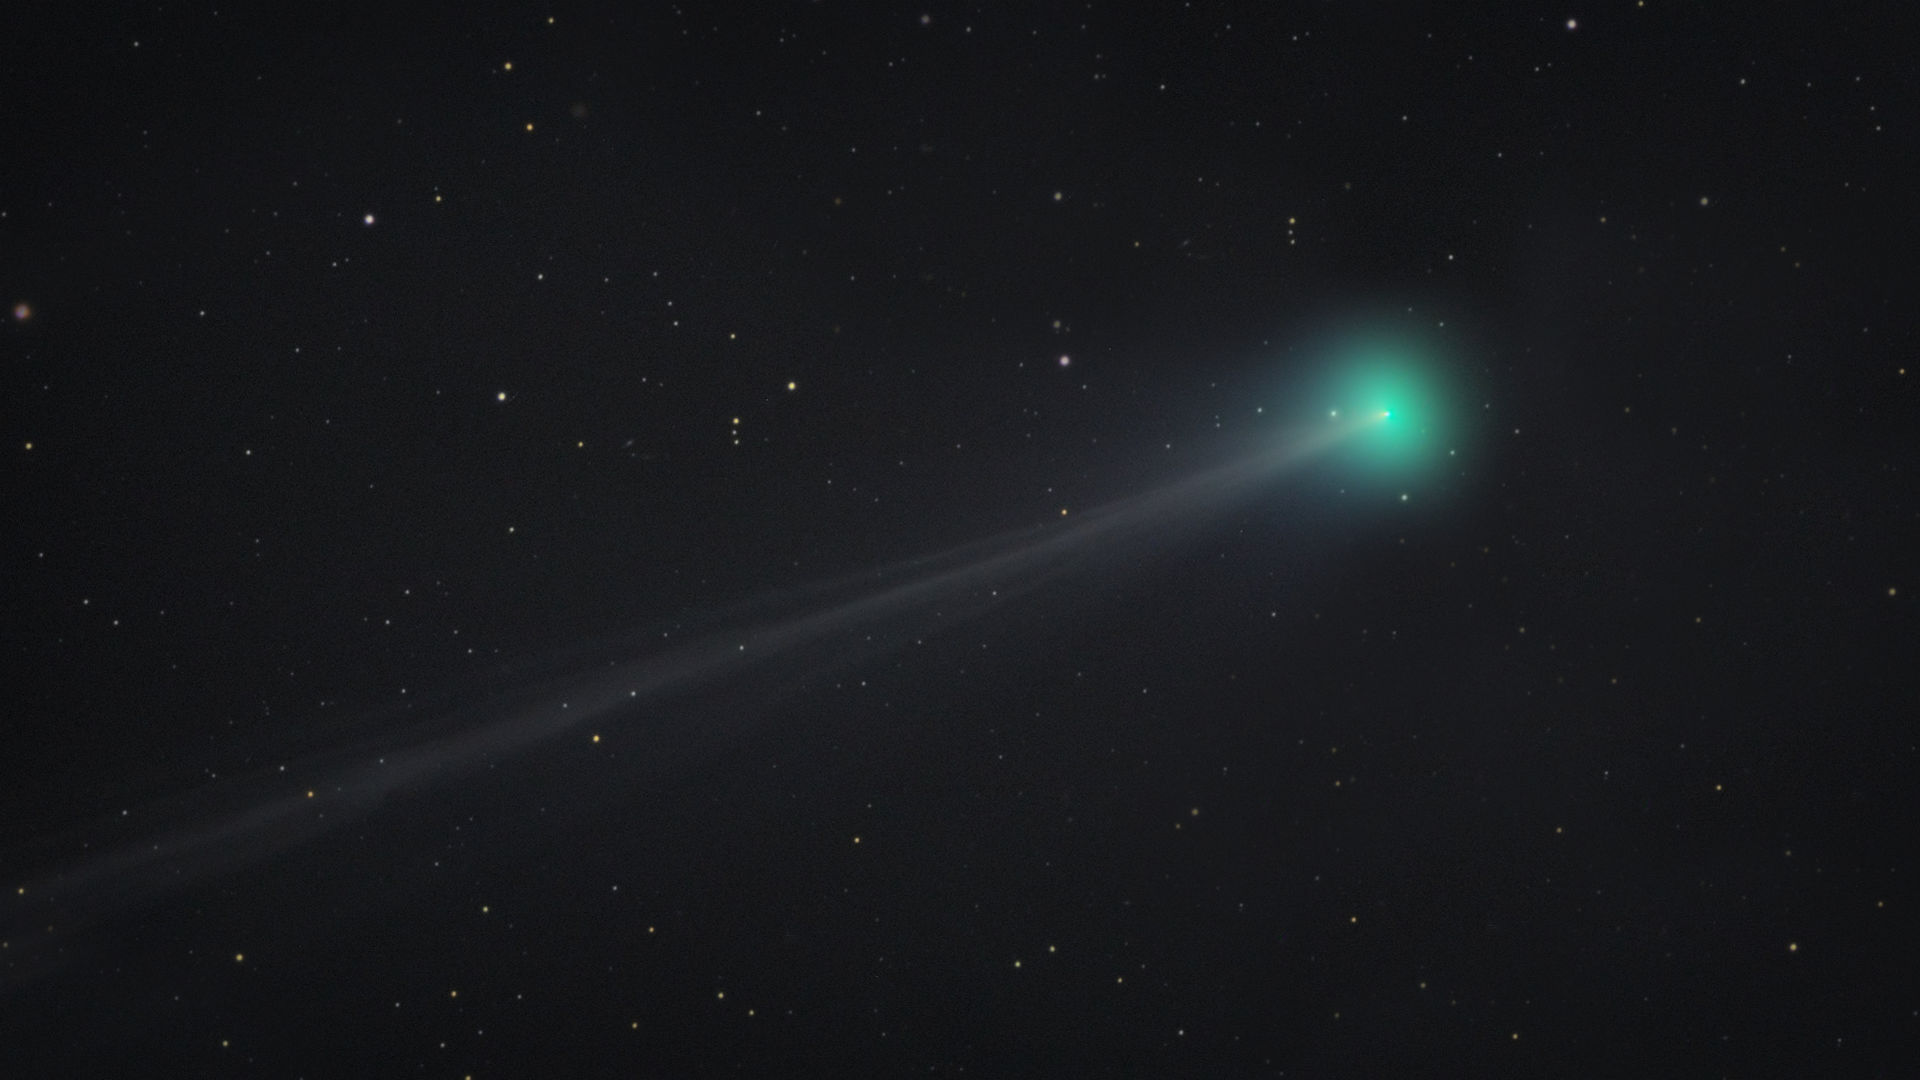 Comet SWAN: How To See And What To Expect